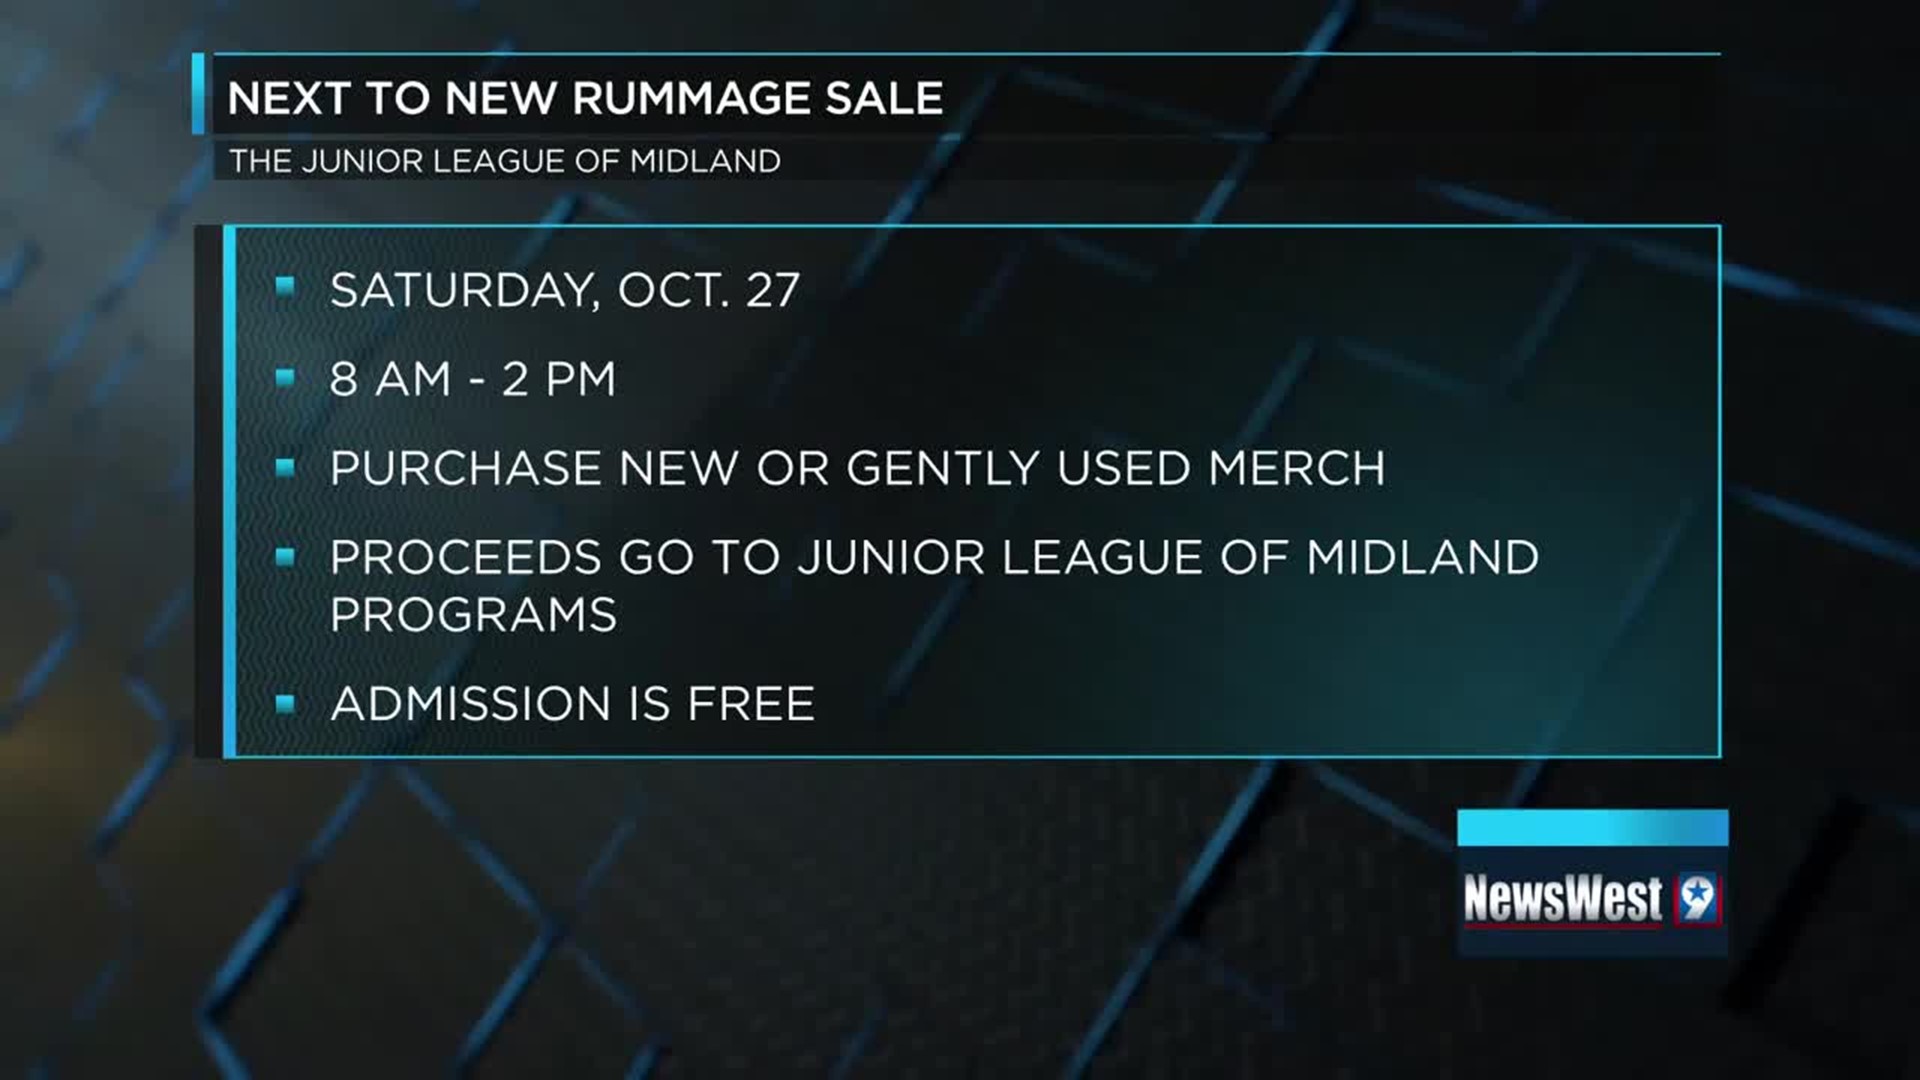 Junior League of Midland holding Next to New Rummage Sale